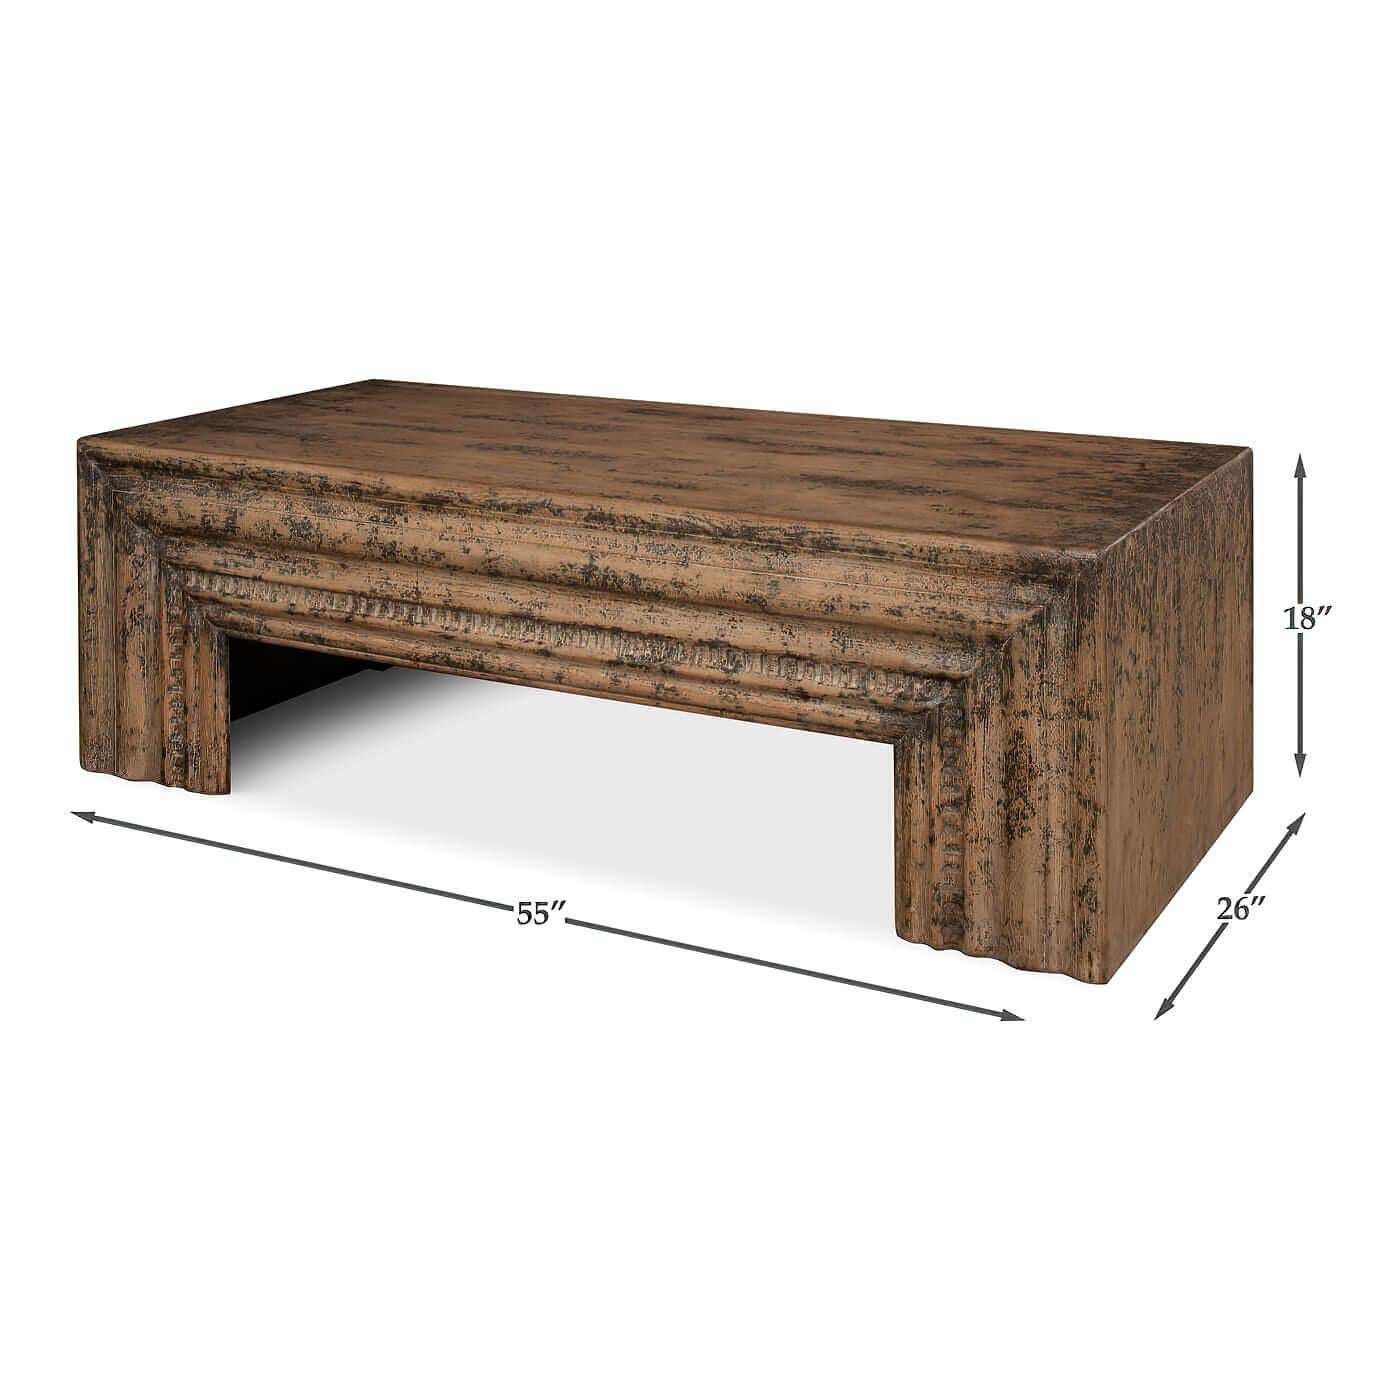 Contemporary Modern Distressed Wood Coffee Table